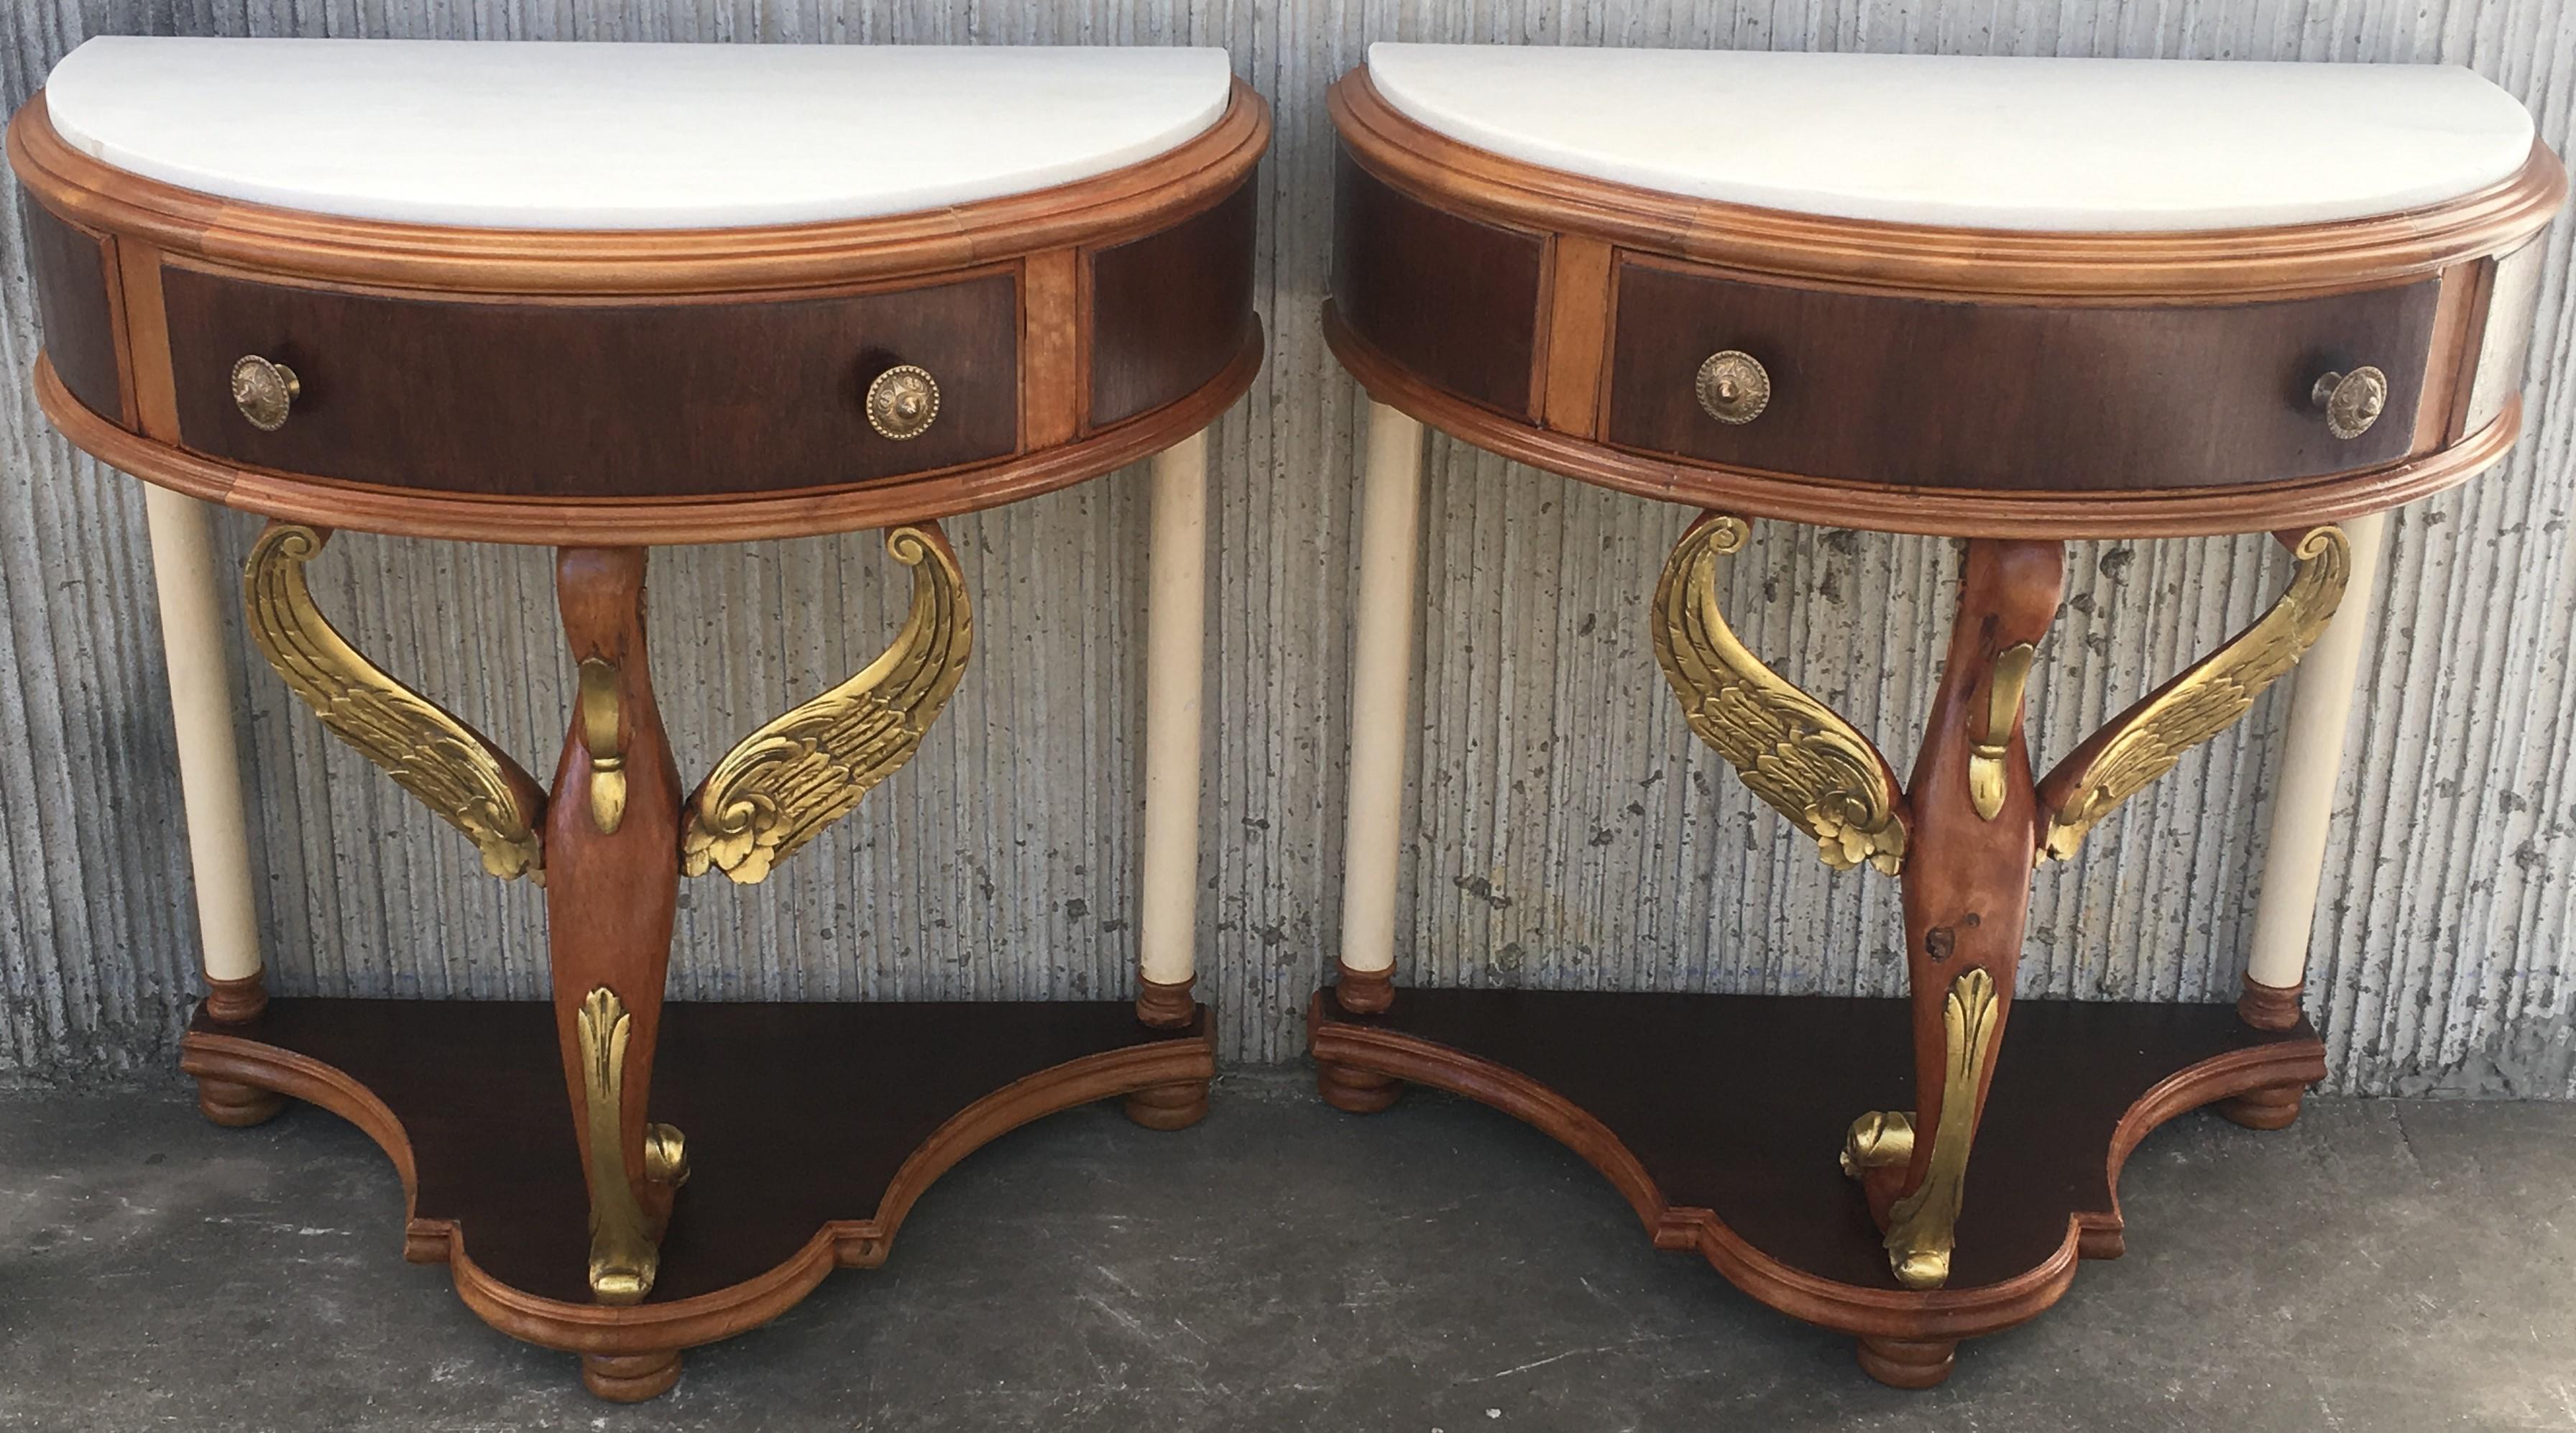 20th century pair of demilune swan nightstands with white marble top
completely restored.